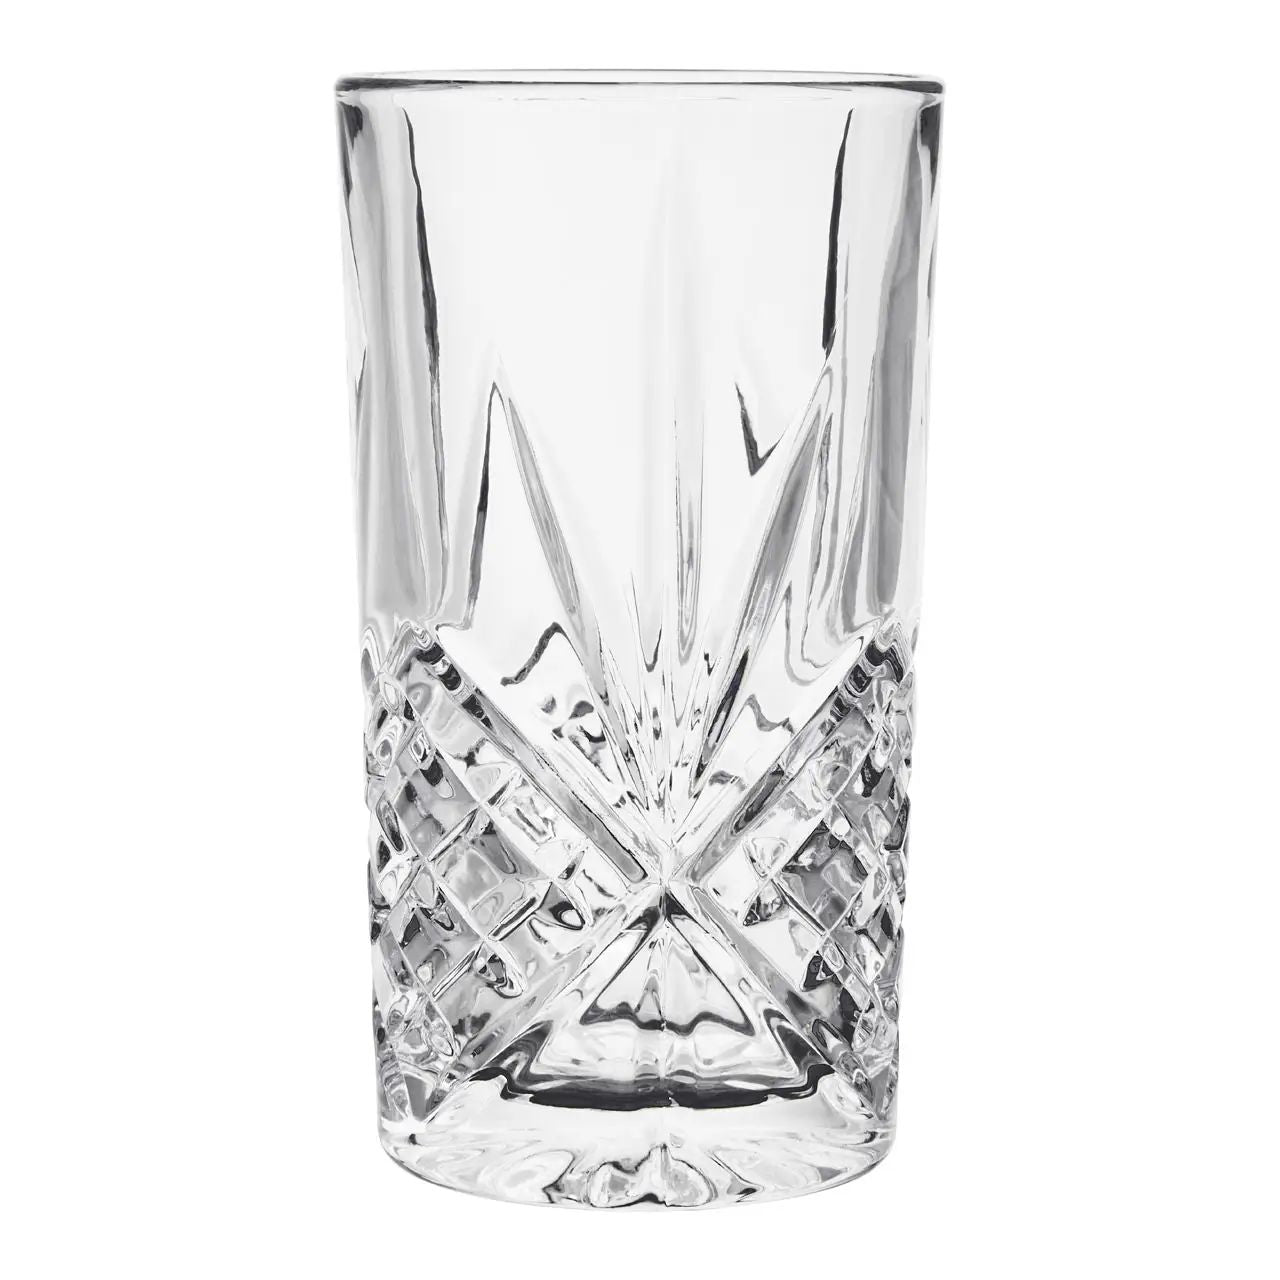 Beaumont Set of 4 Crystal High Ball Glasses